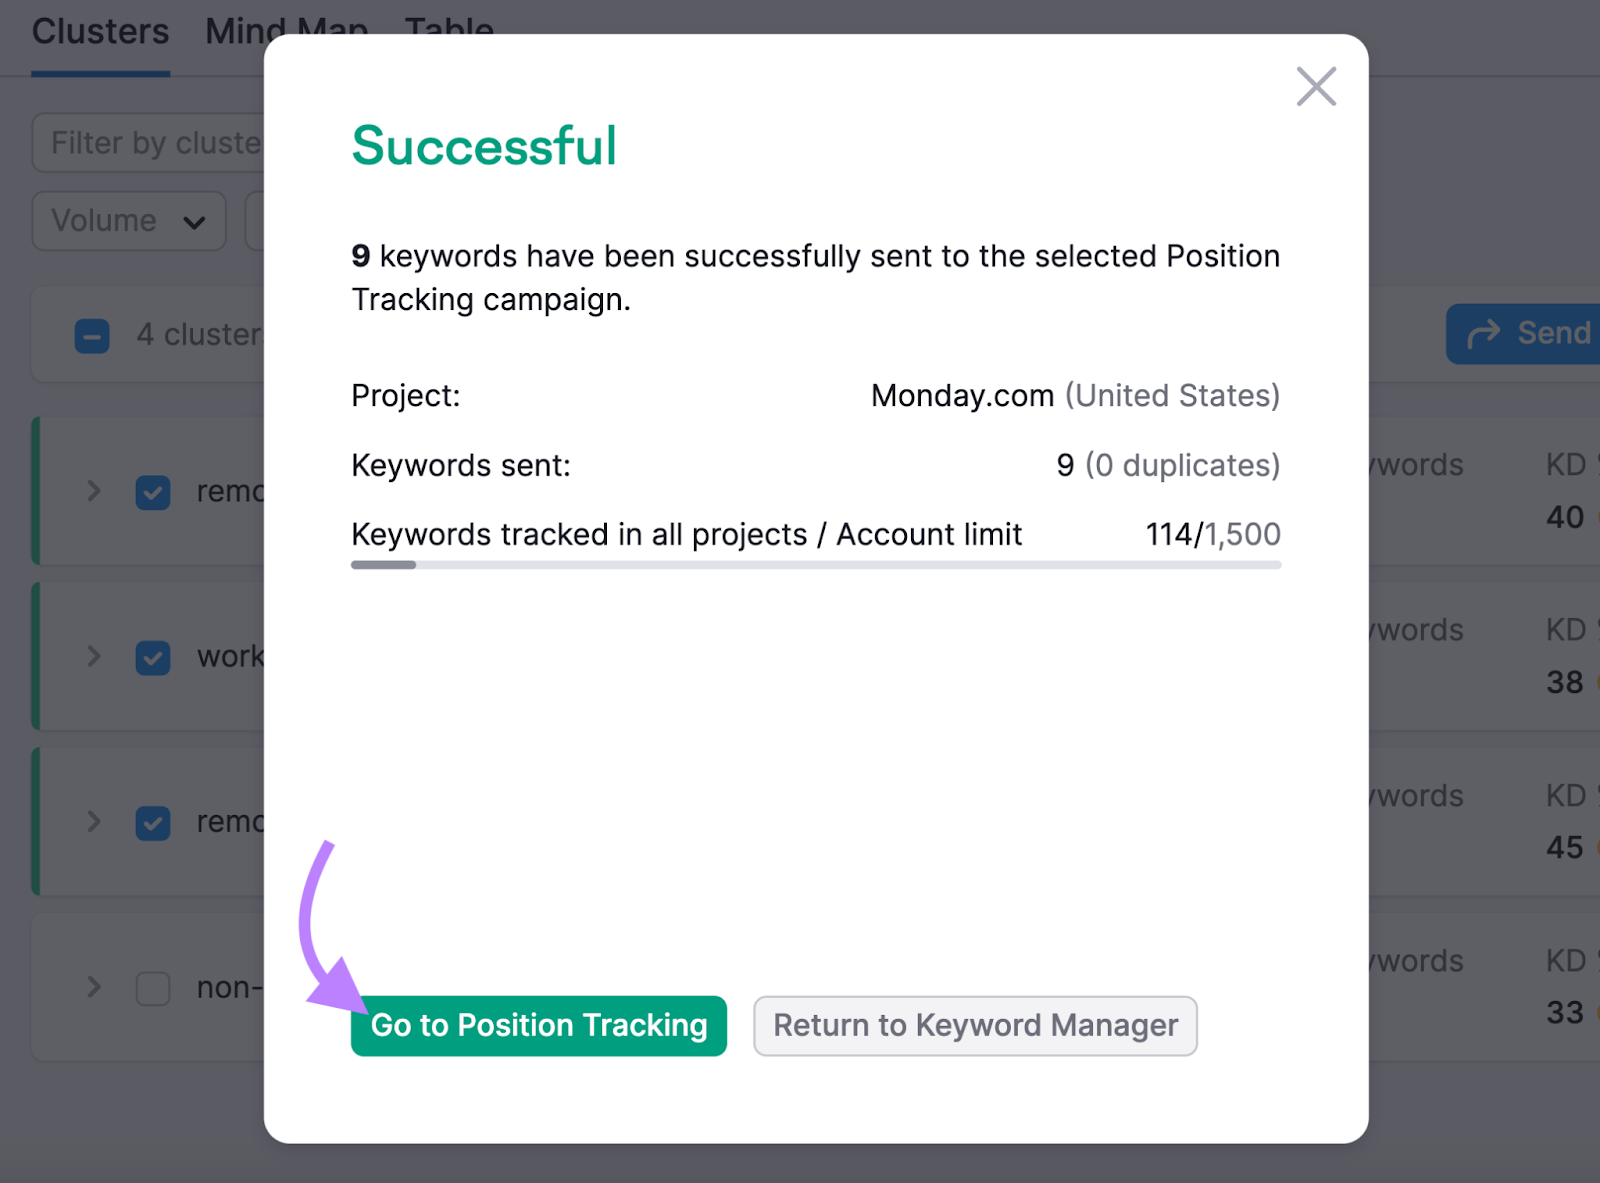 “Go to Position Tracking” button selected under "Successful" window